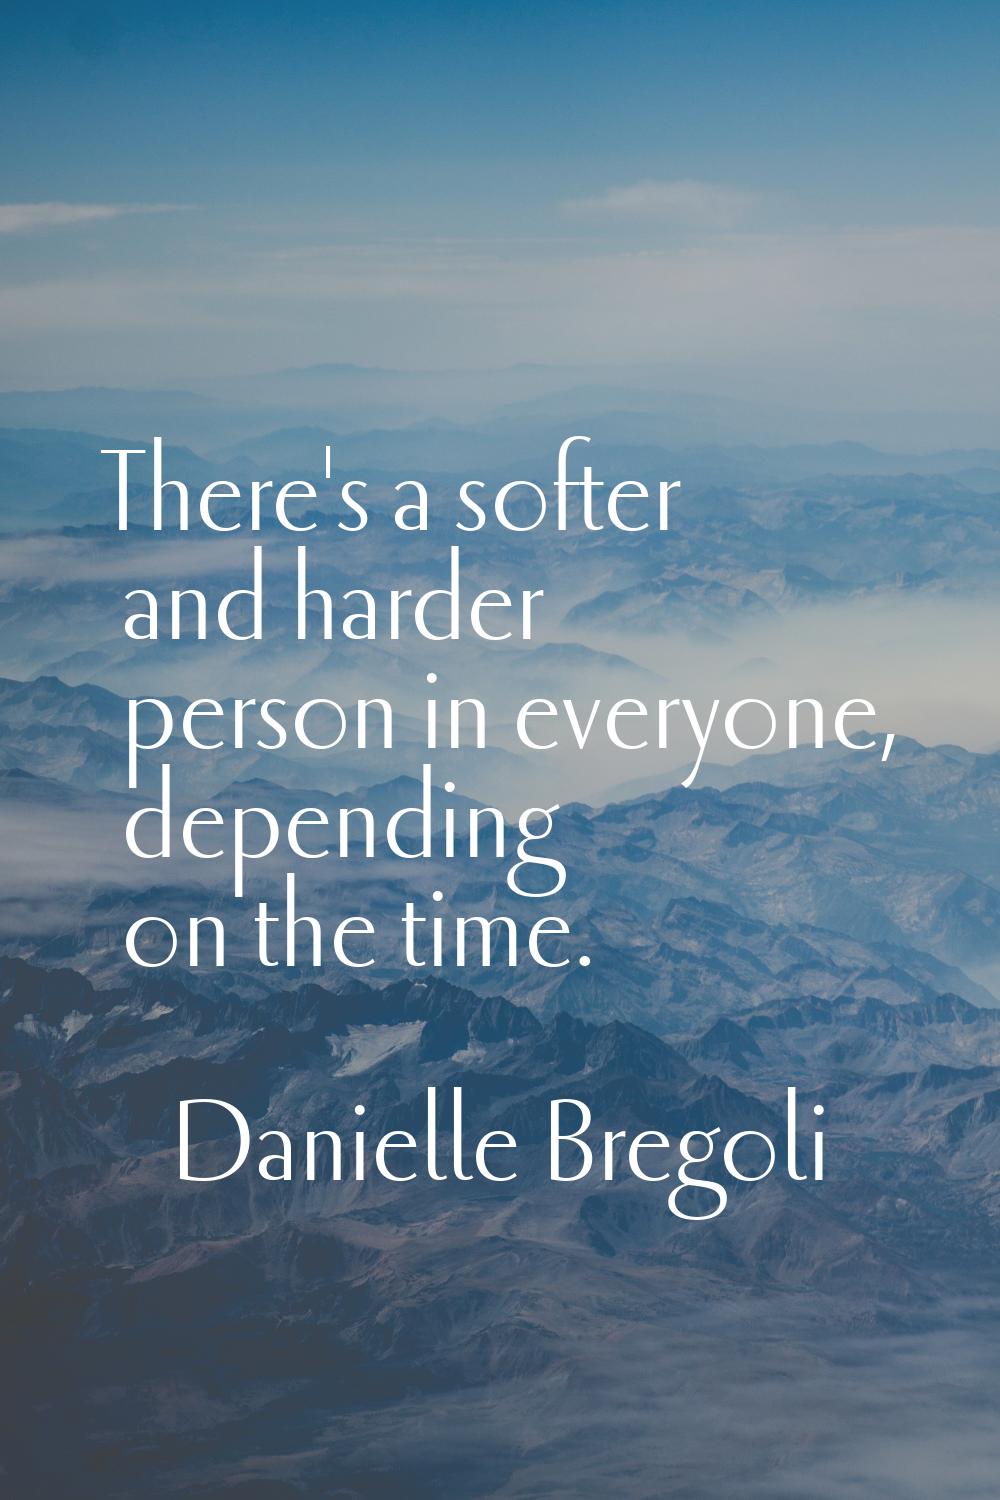 There's a softer and harder person in everyone, depending on the time.